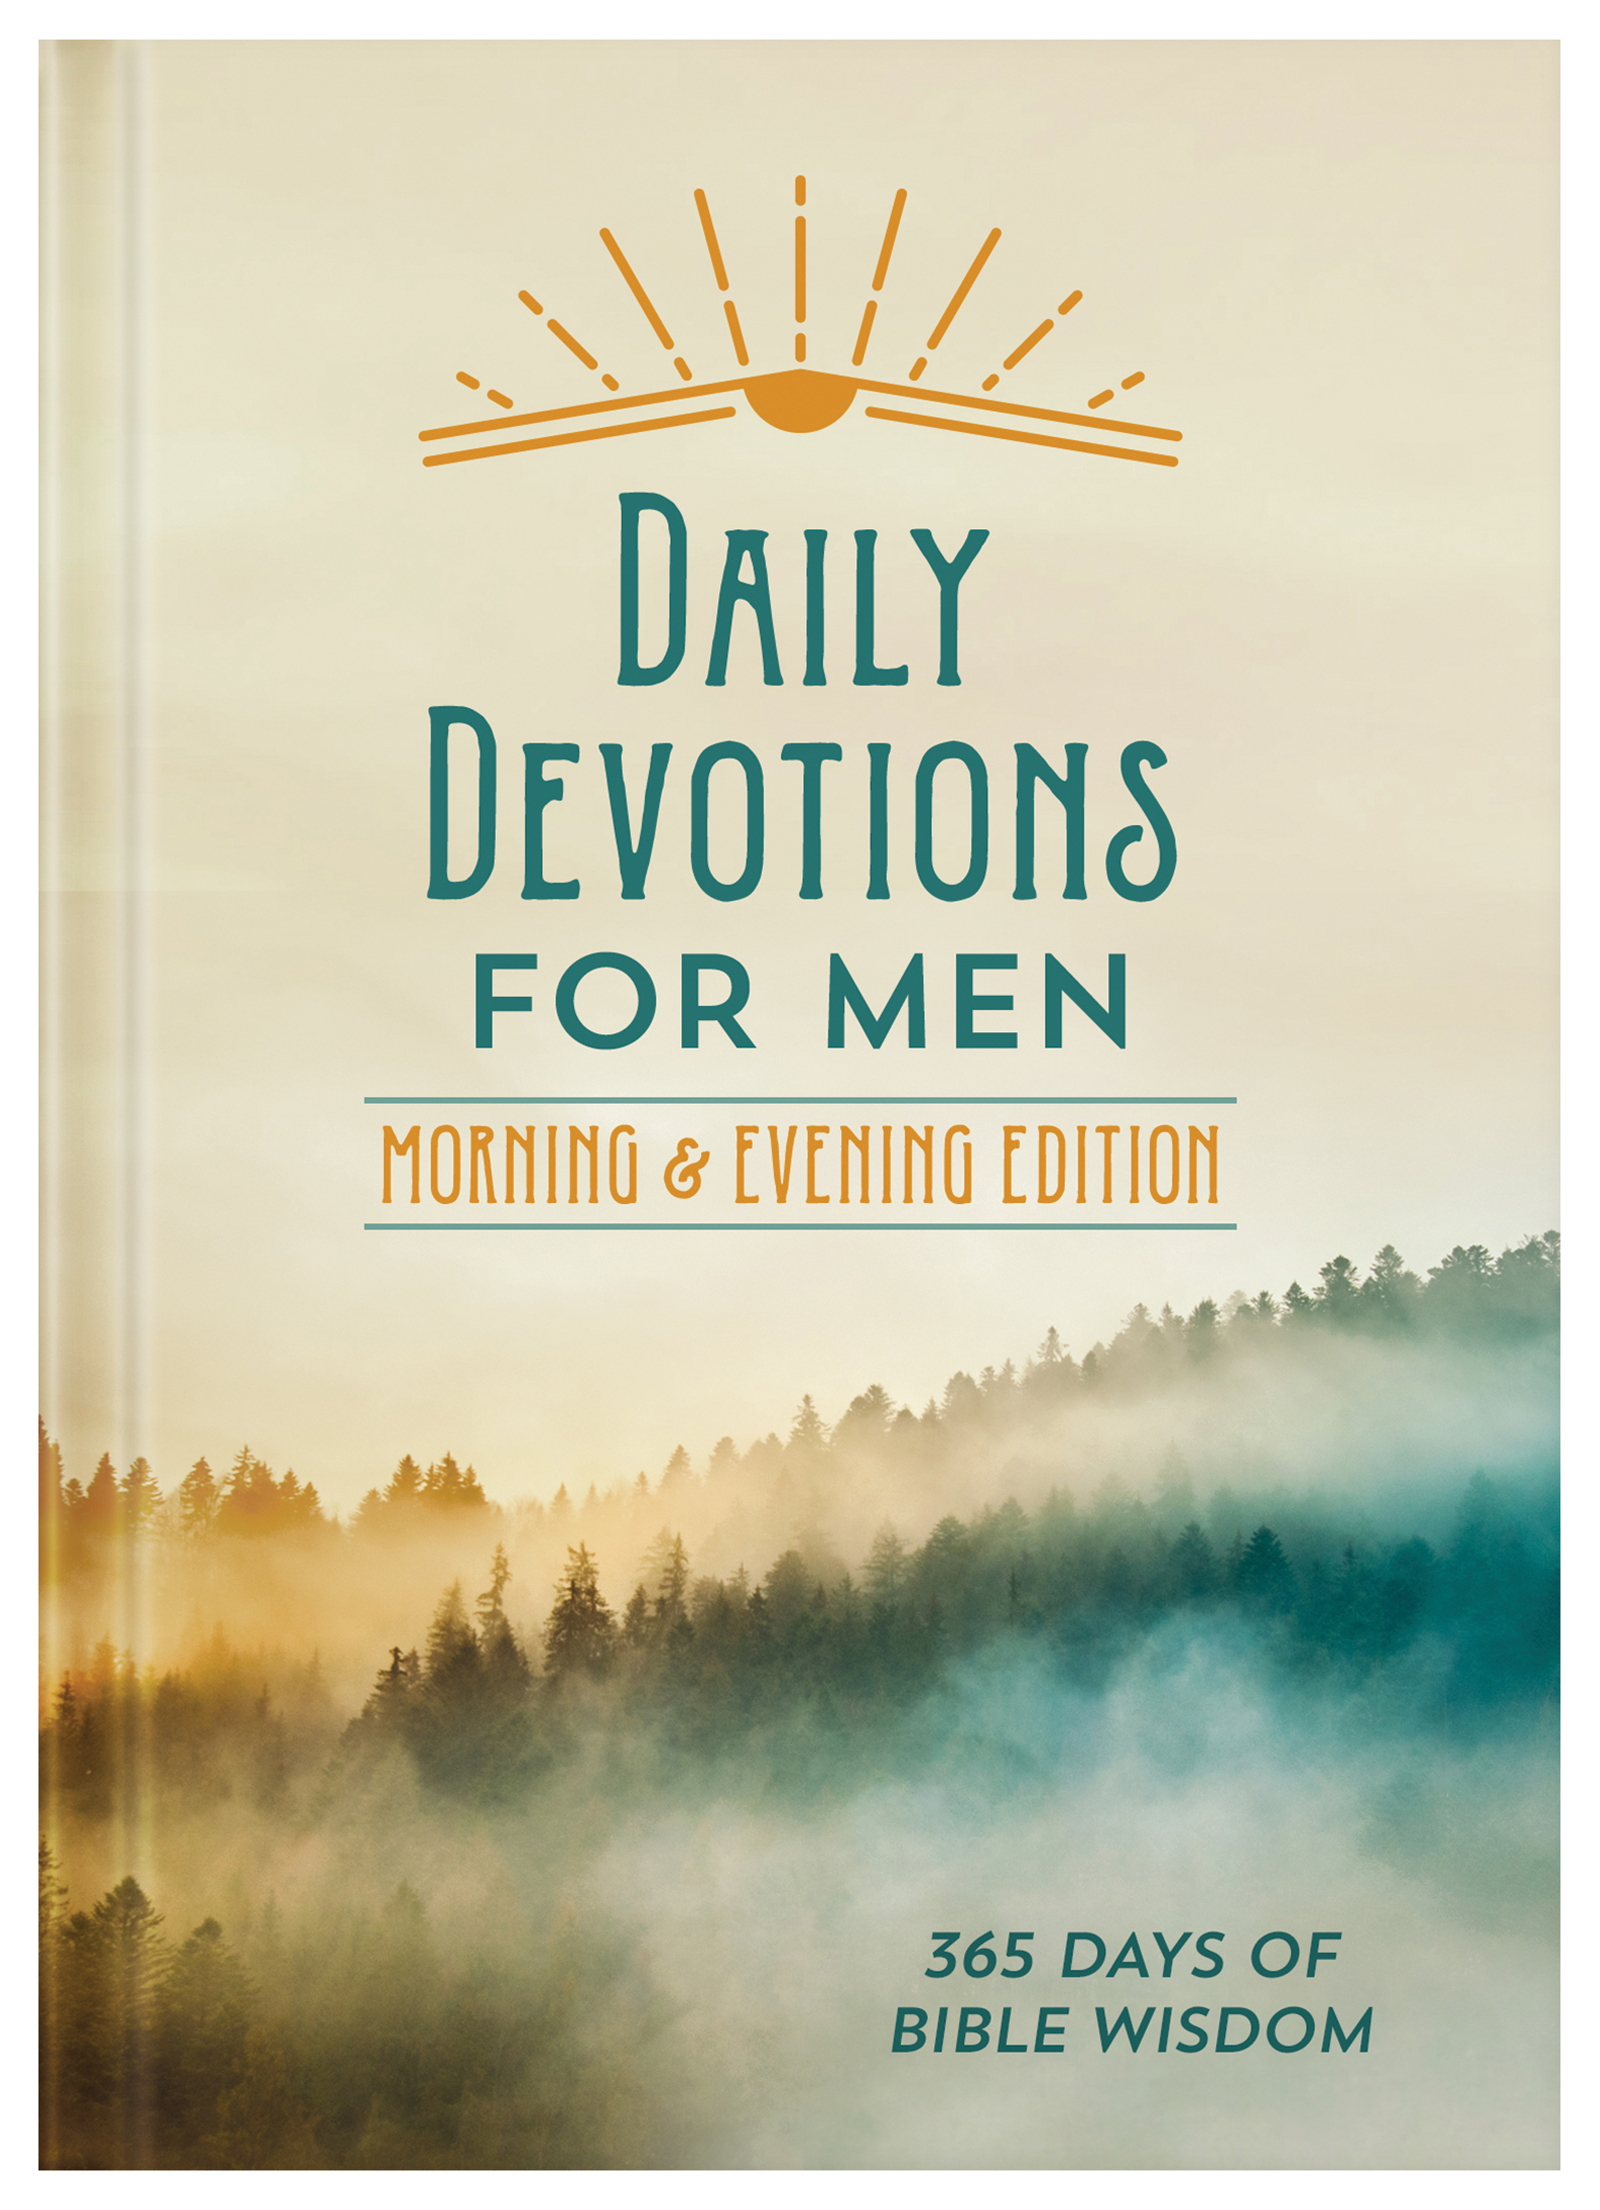 Daily Devotions for Men Morning & Evening Edition Free Delivery